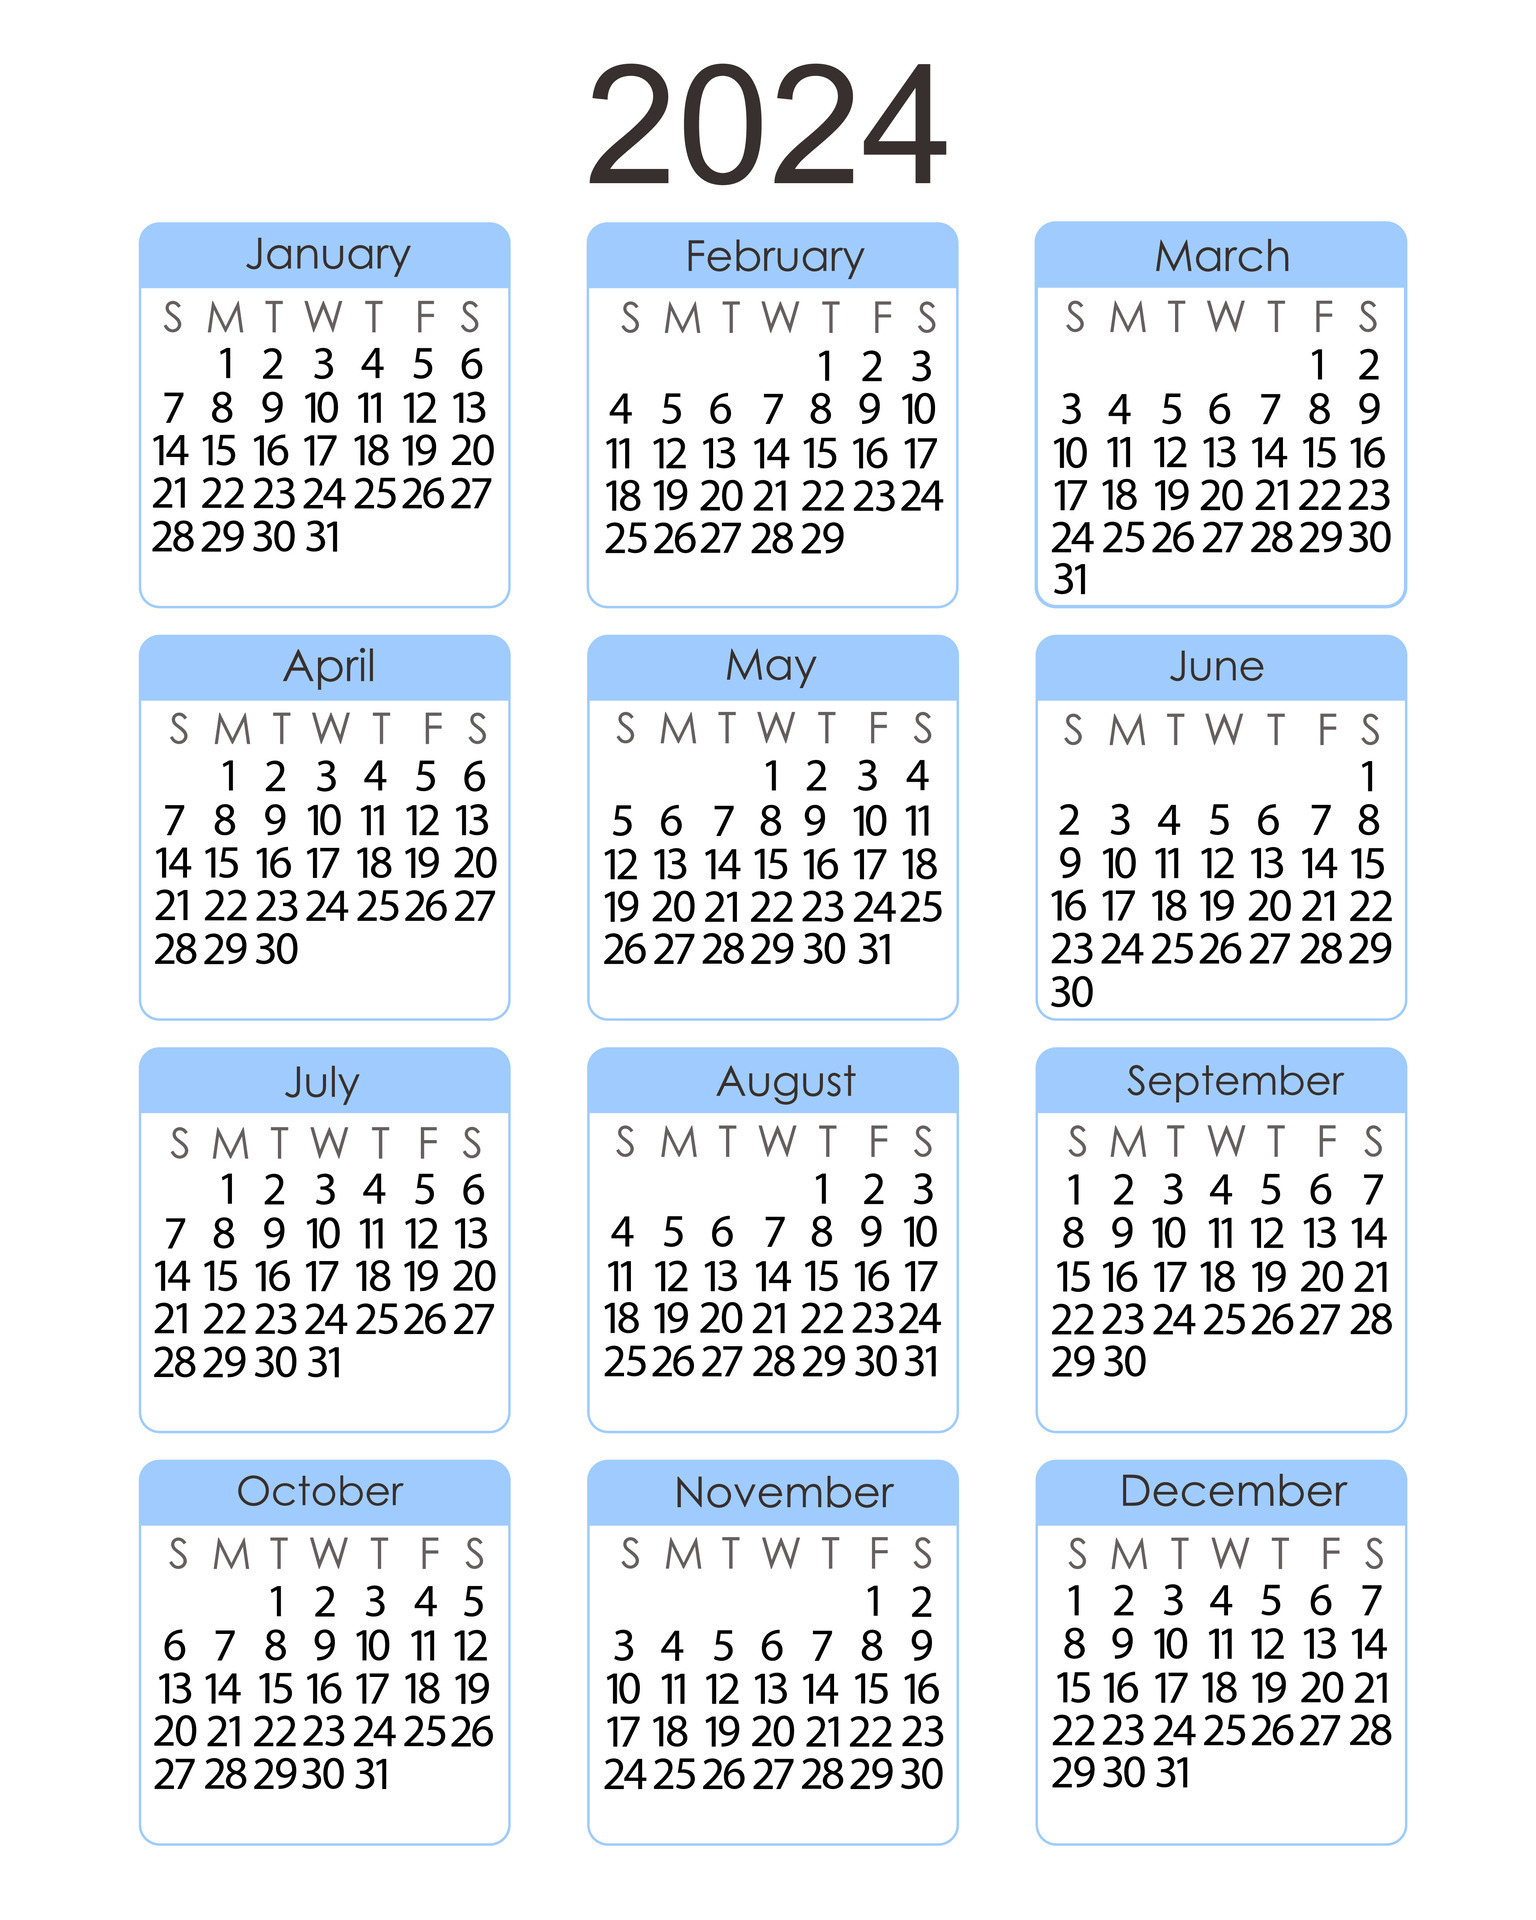 Calendar Template For The Year 2024 In Simple Minimalist Style | 2024 Calendar Year To A Page